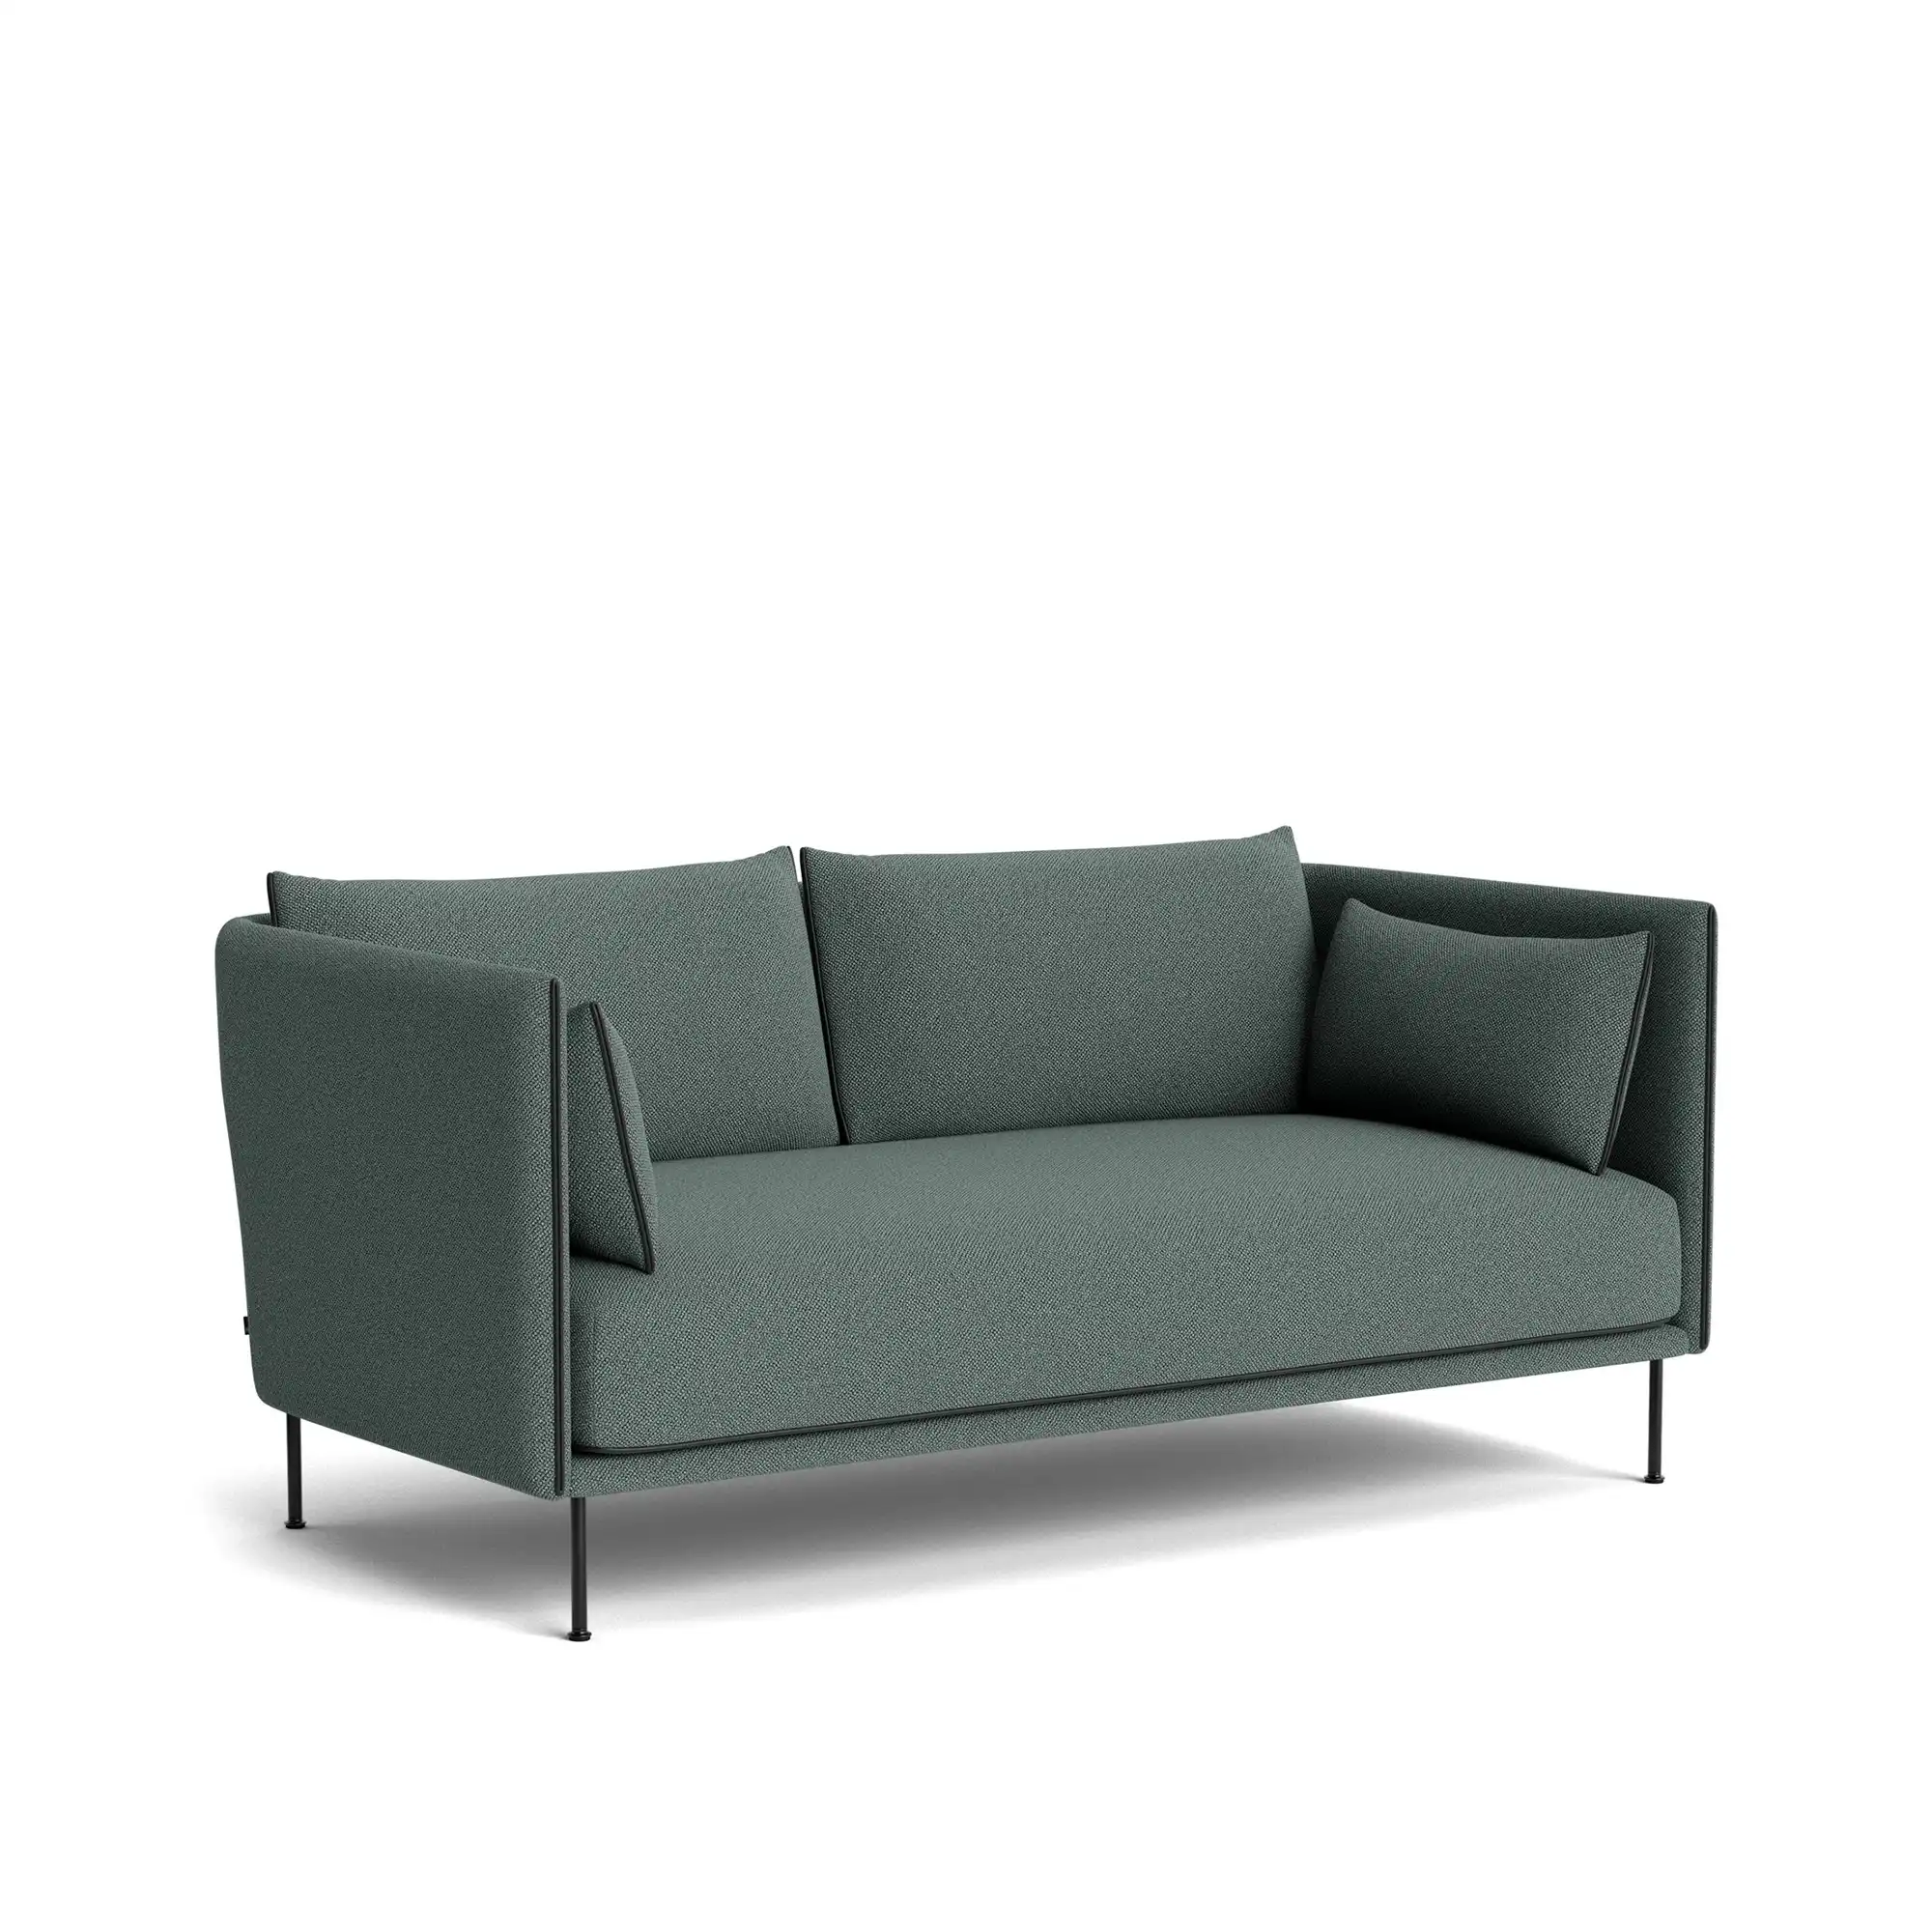 Silhouette 2 Seater - Black Piping